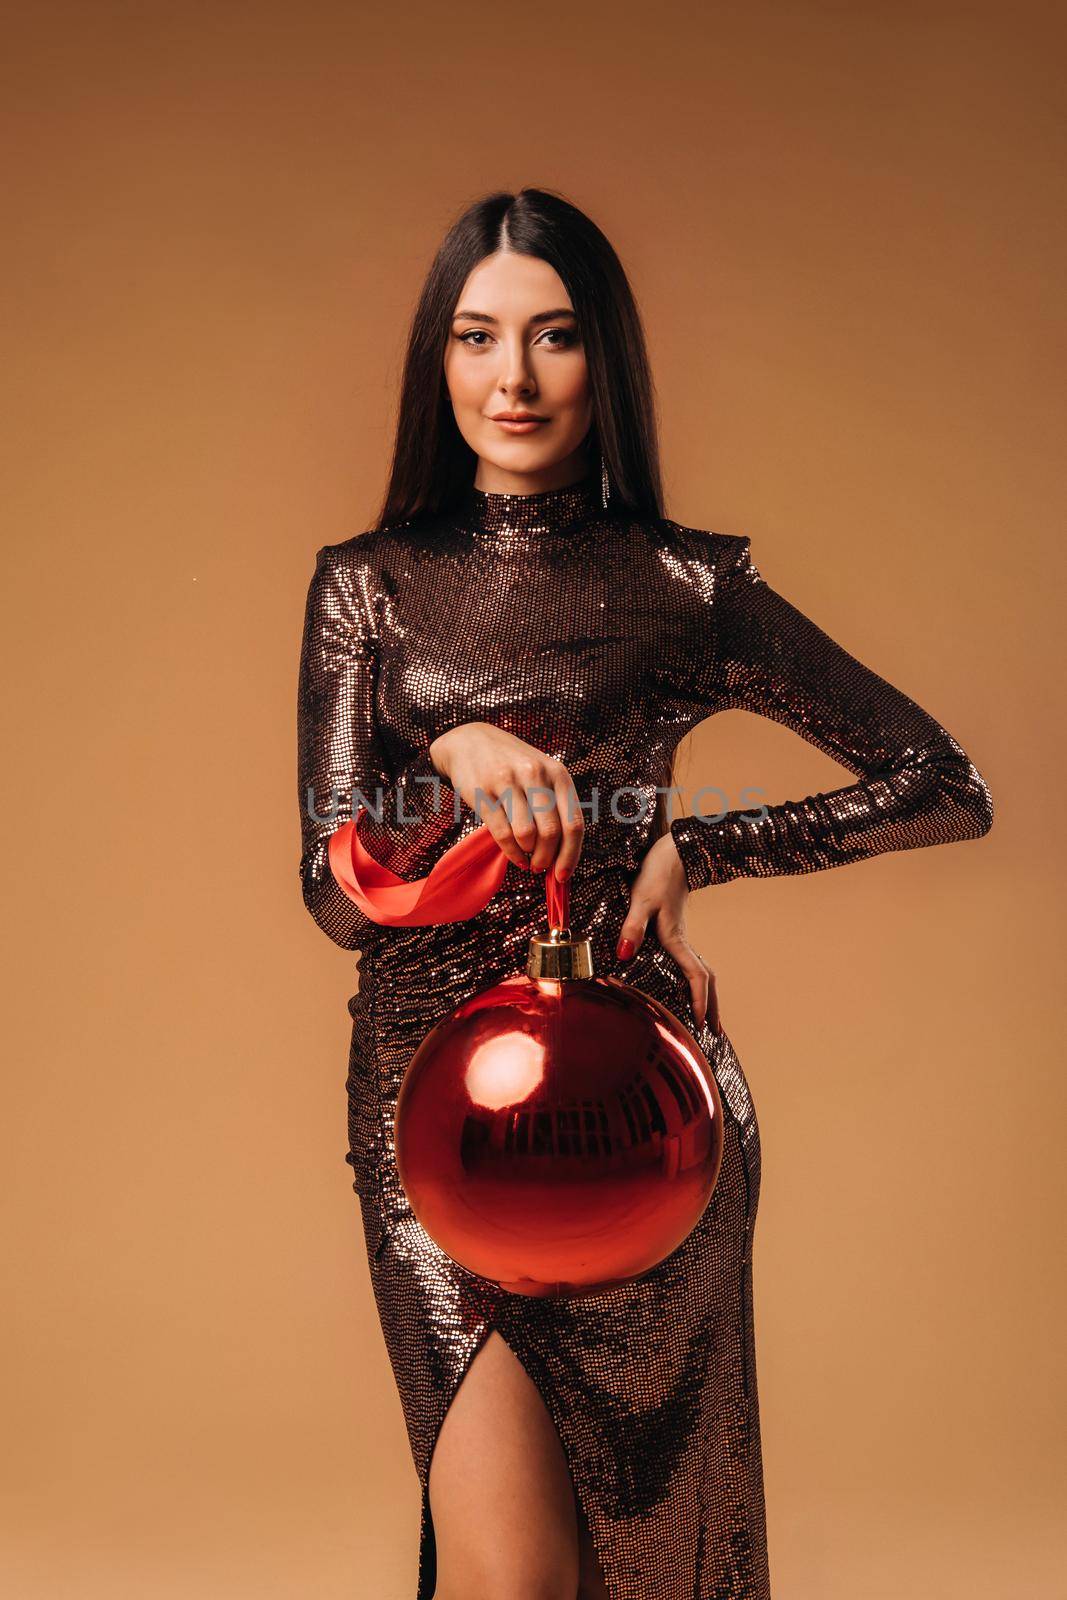 Girl with long hair in a shiny dress with a large Christmas ball on a brown background.